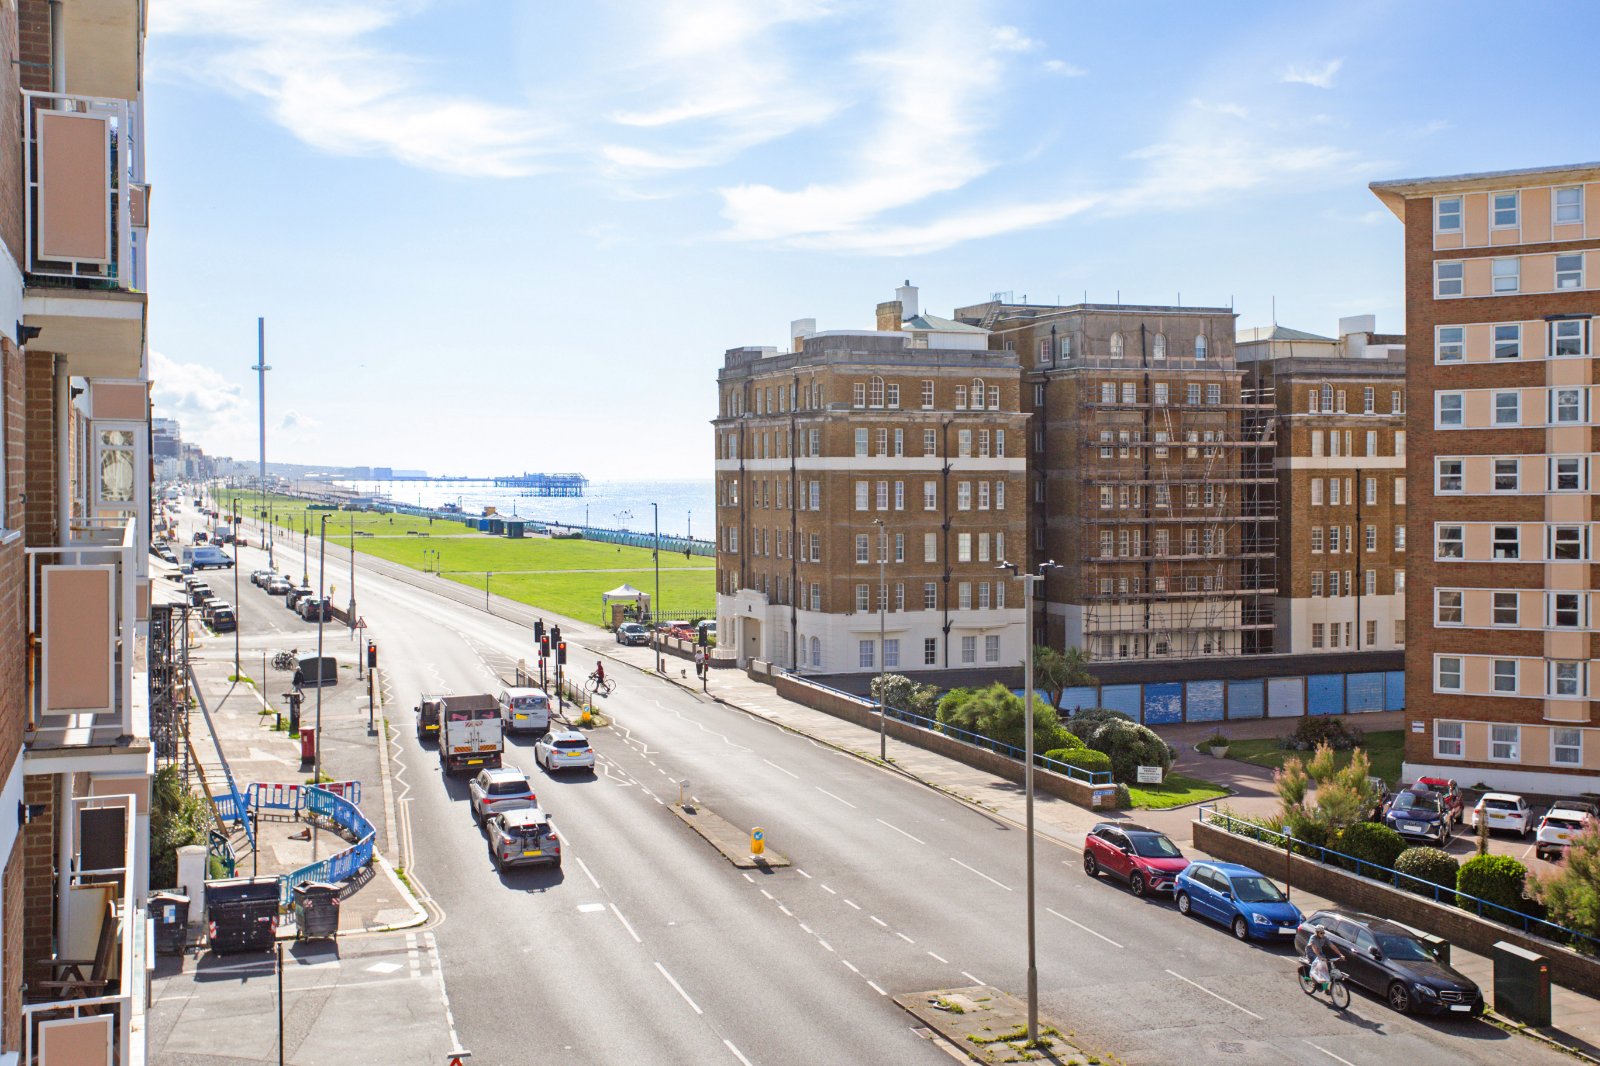 Albany Towers, 6 St. Catherines Terrace, Hove, East Sussex, BN3